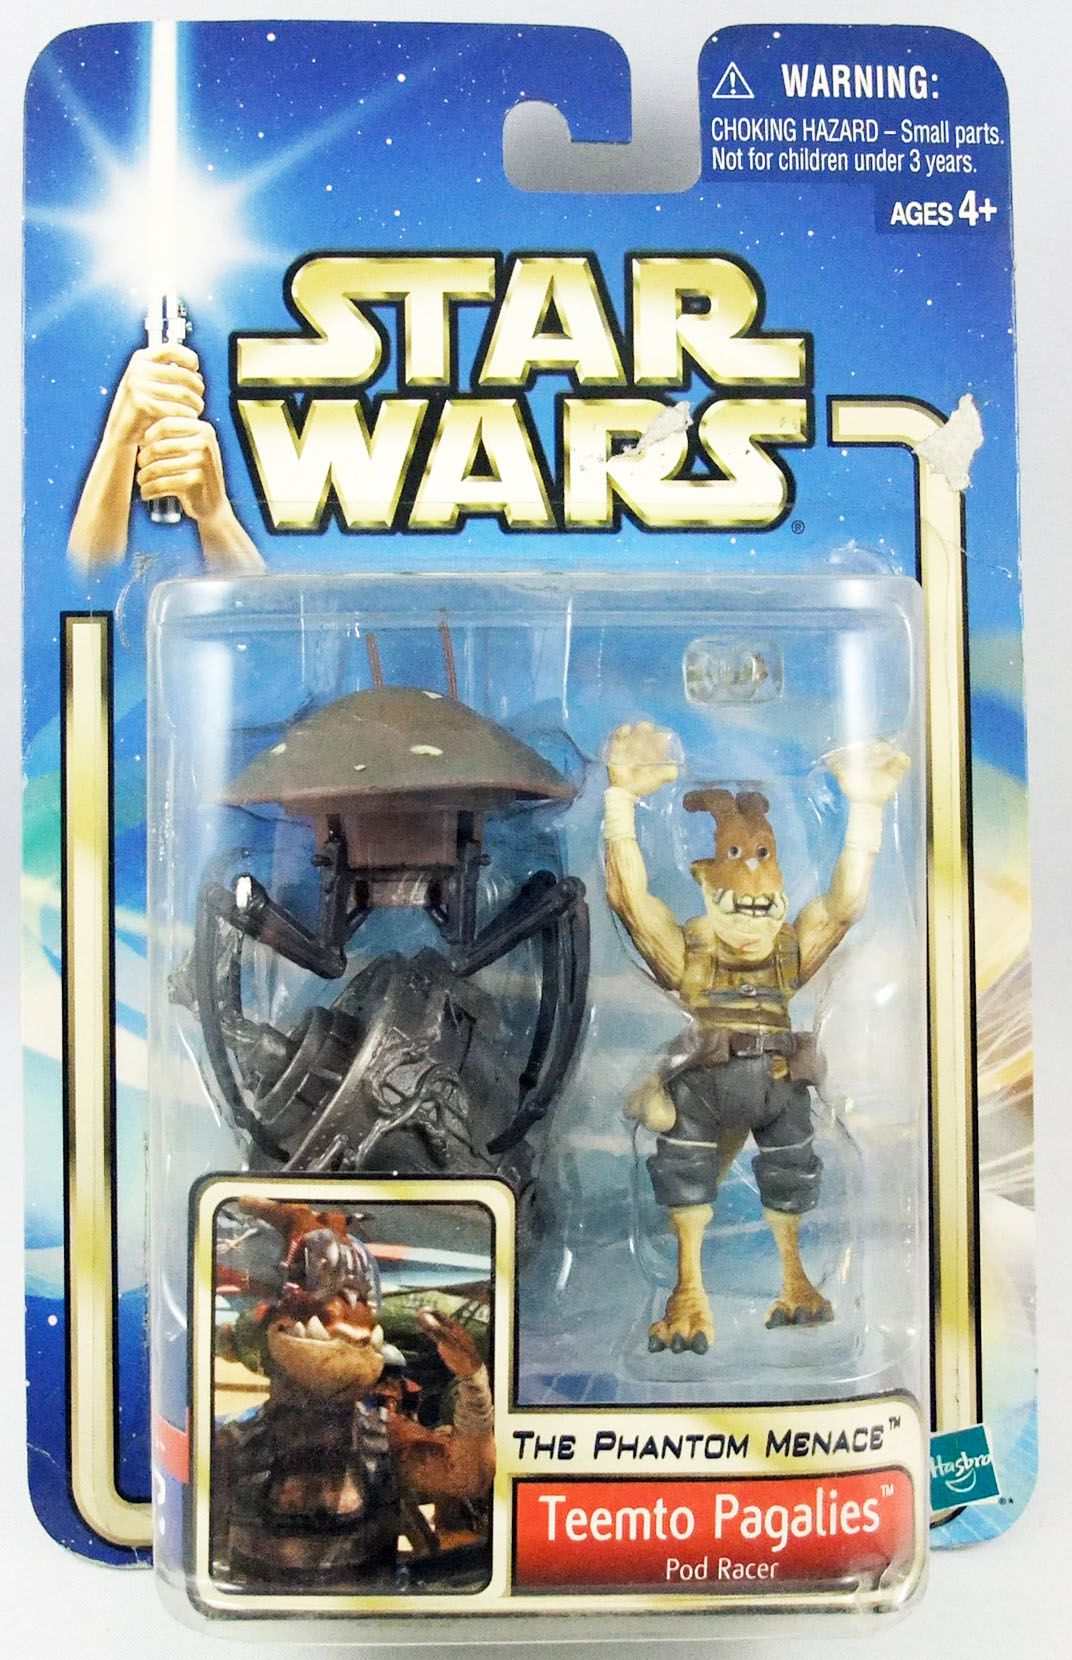 Star Wars 84813 Teemto Pagalies Pod Racer Figure The Phantom Menace Carded 200 for sale online 